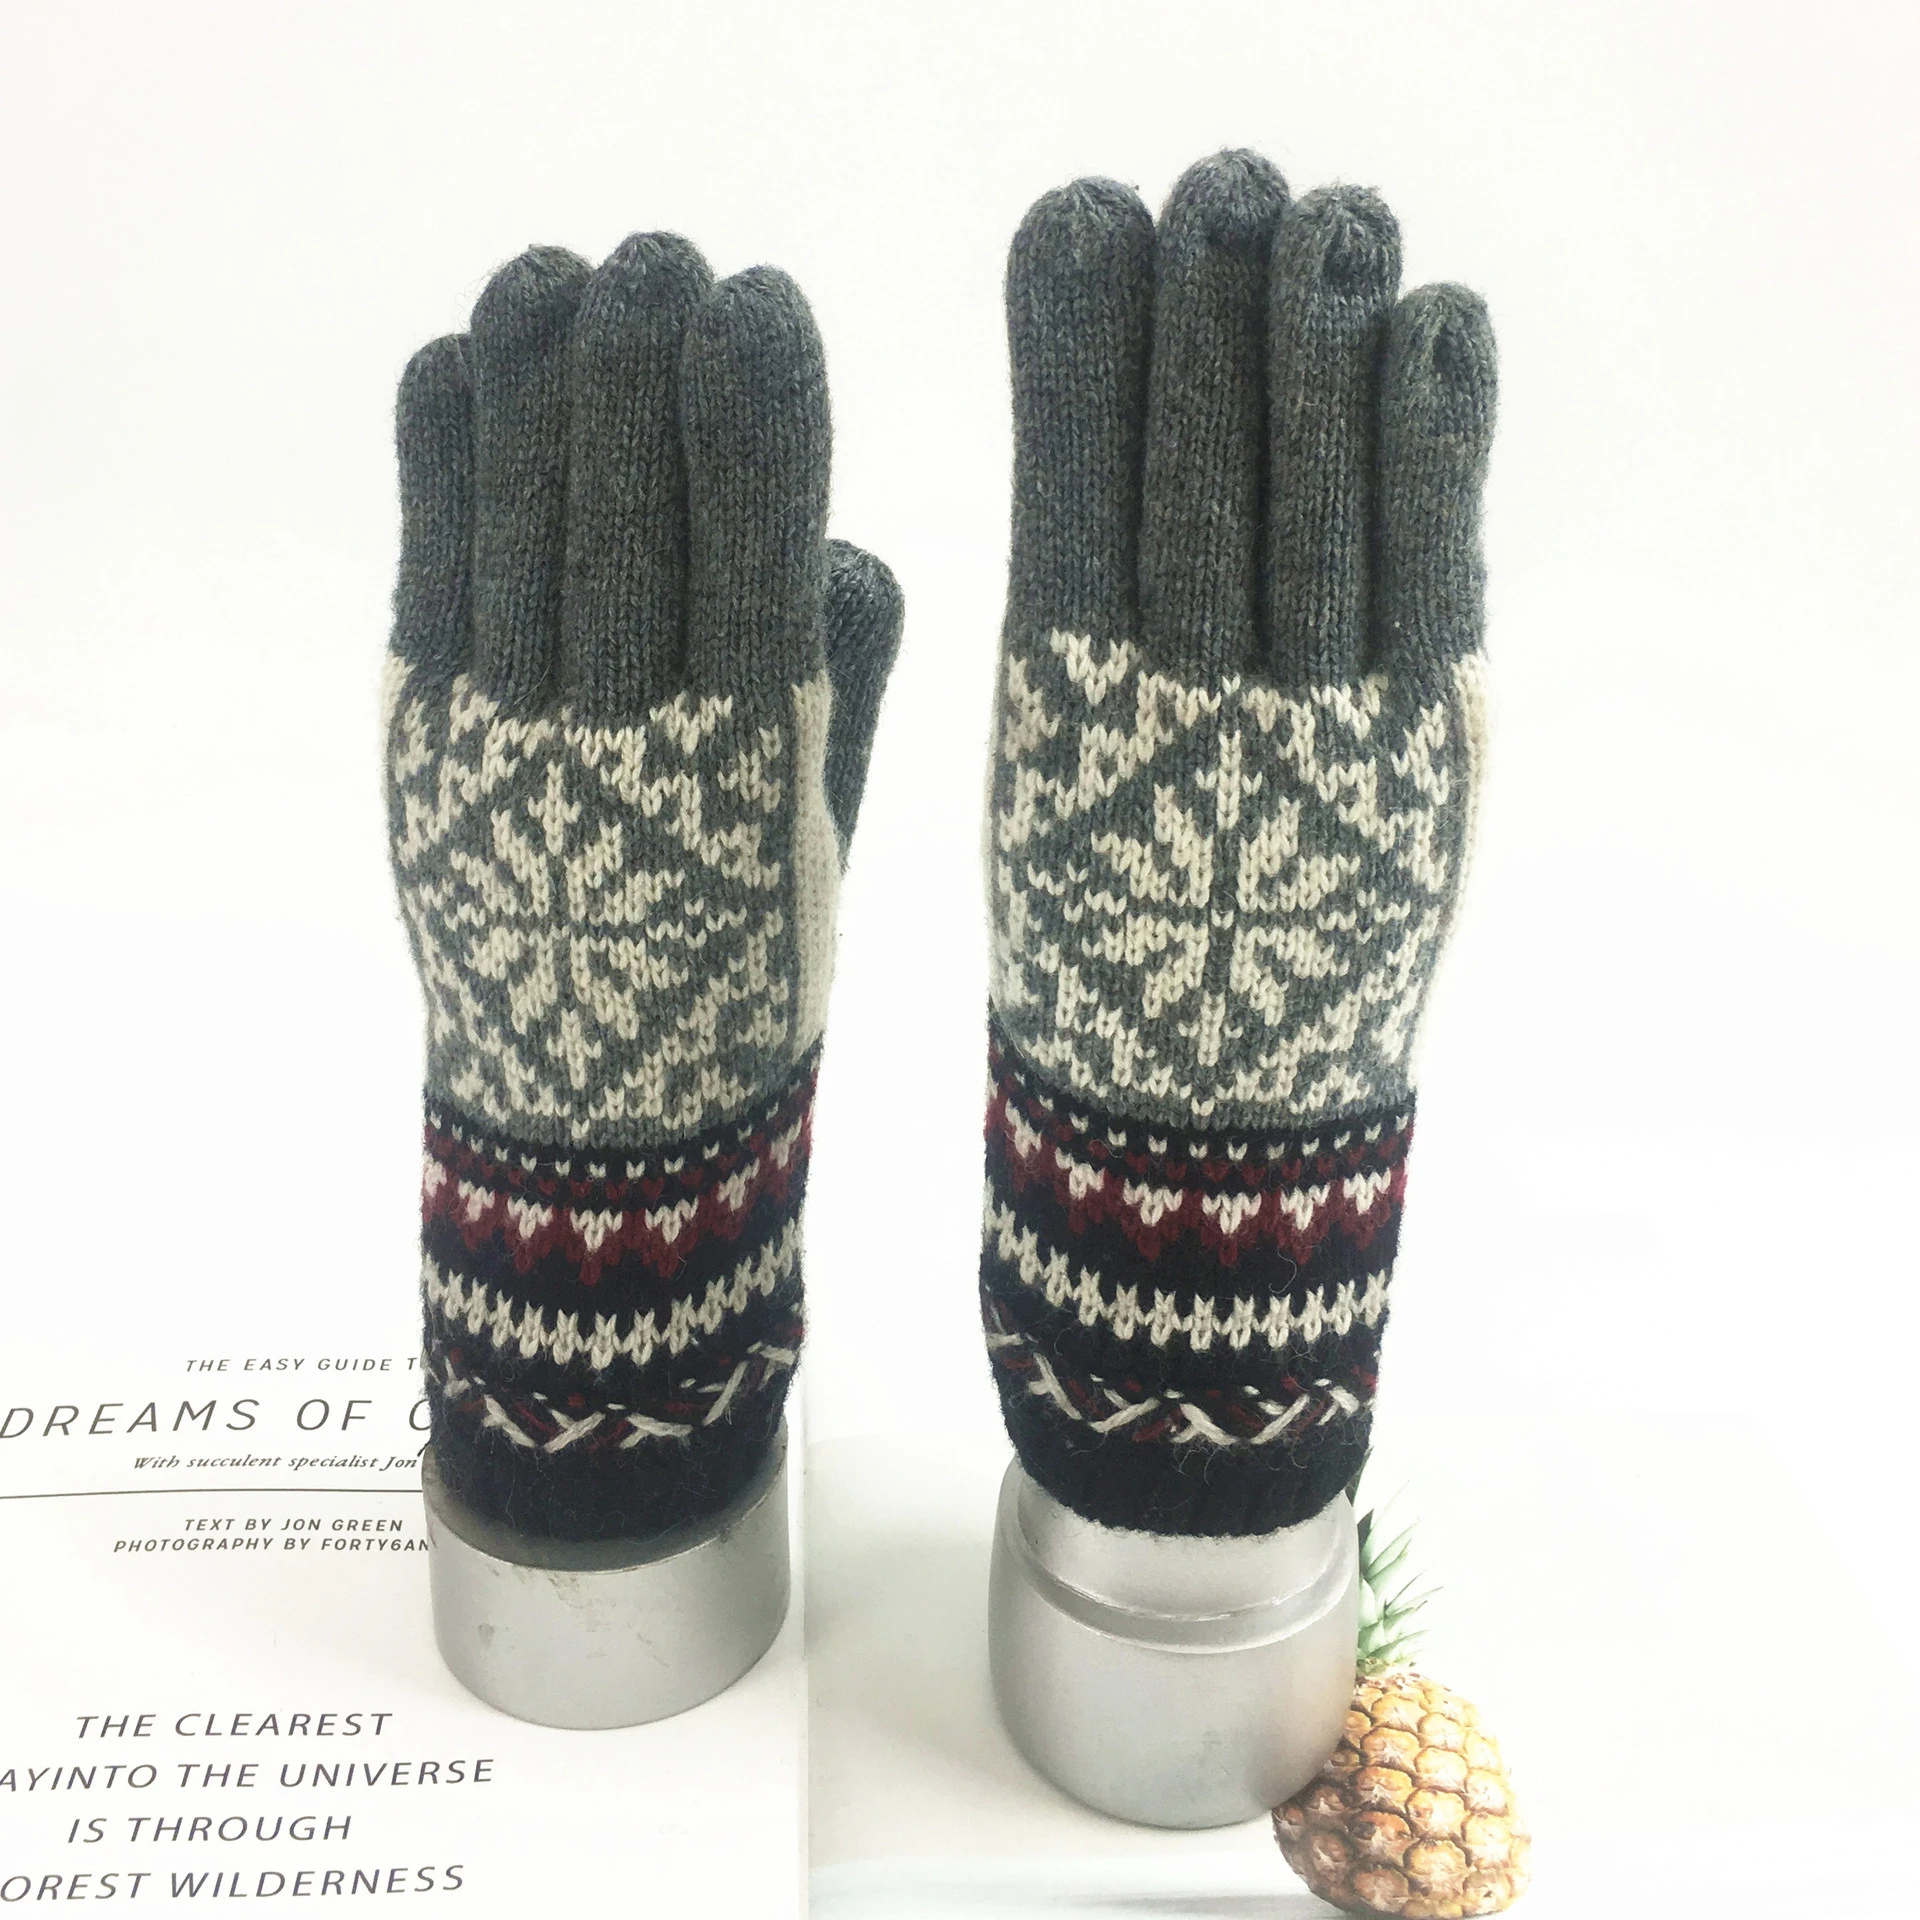 Winter new shopping mall hot sale gloves men and women jacquard knitted warm five-finger color gloves lovers wool knitted gloves